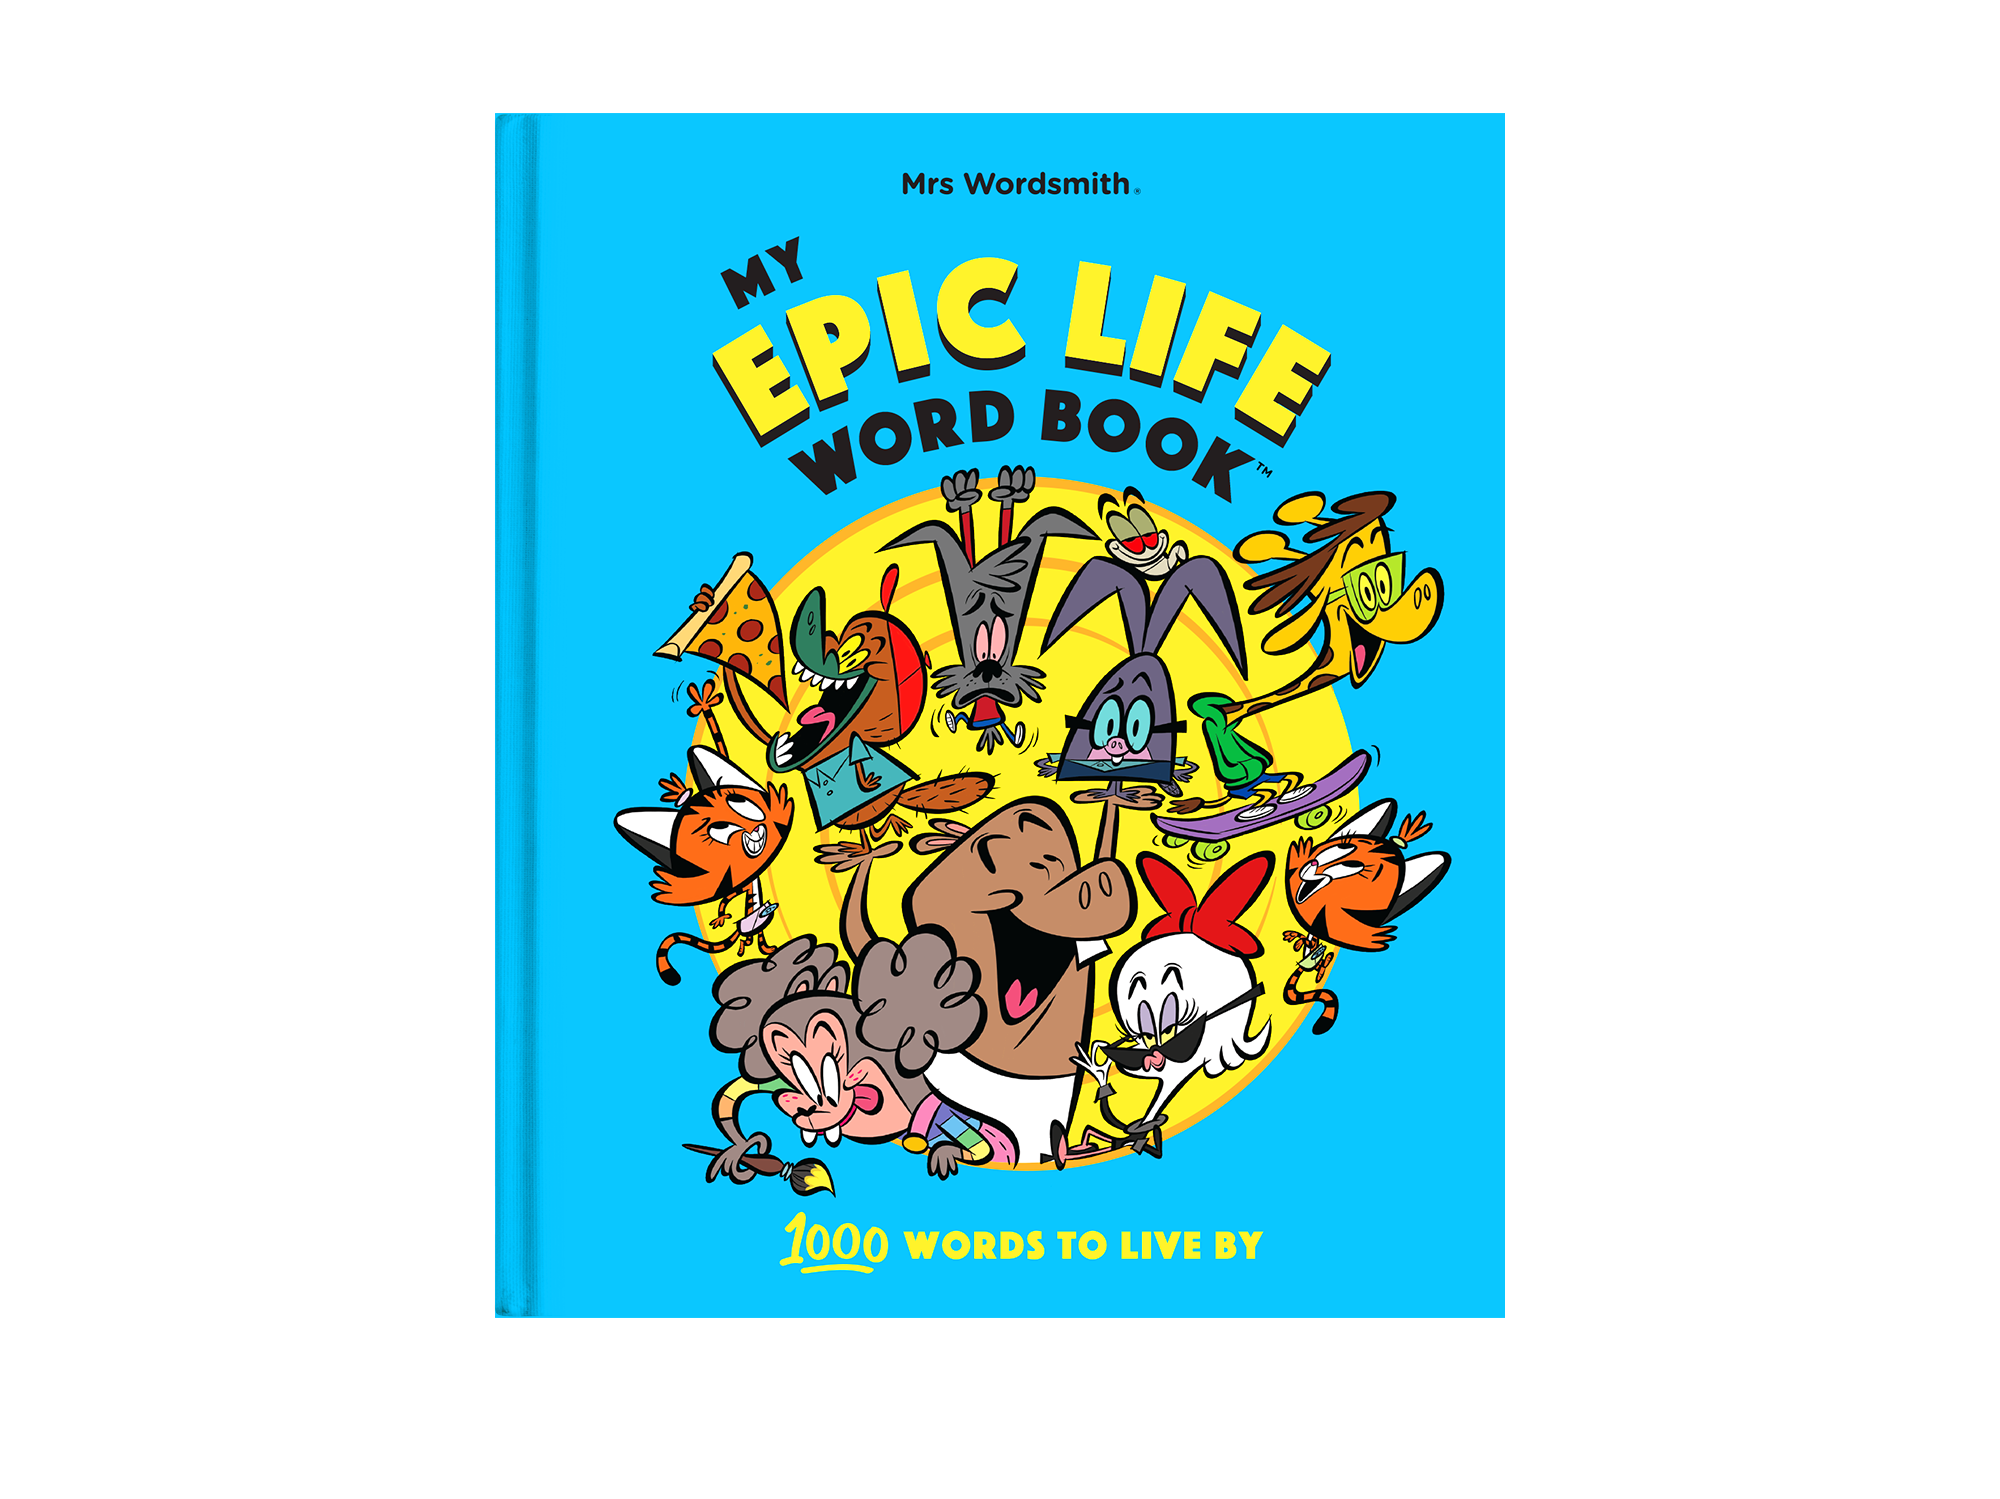 My Epic Life Word Book